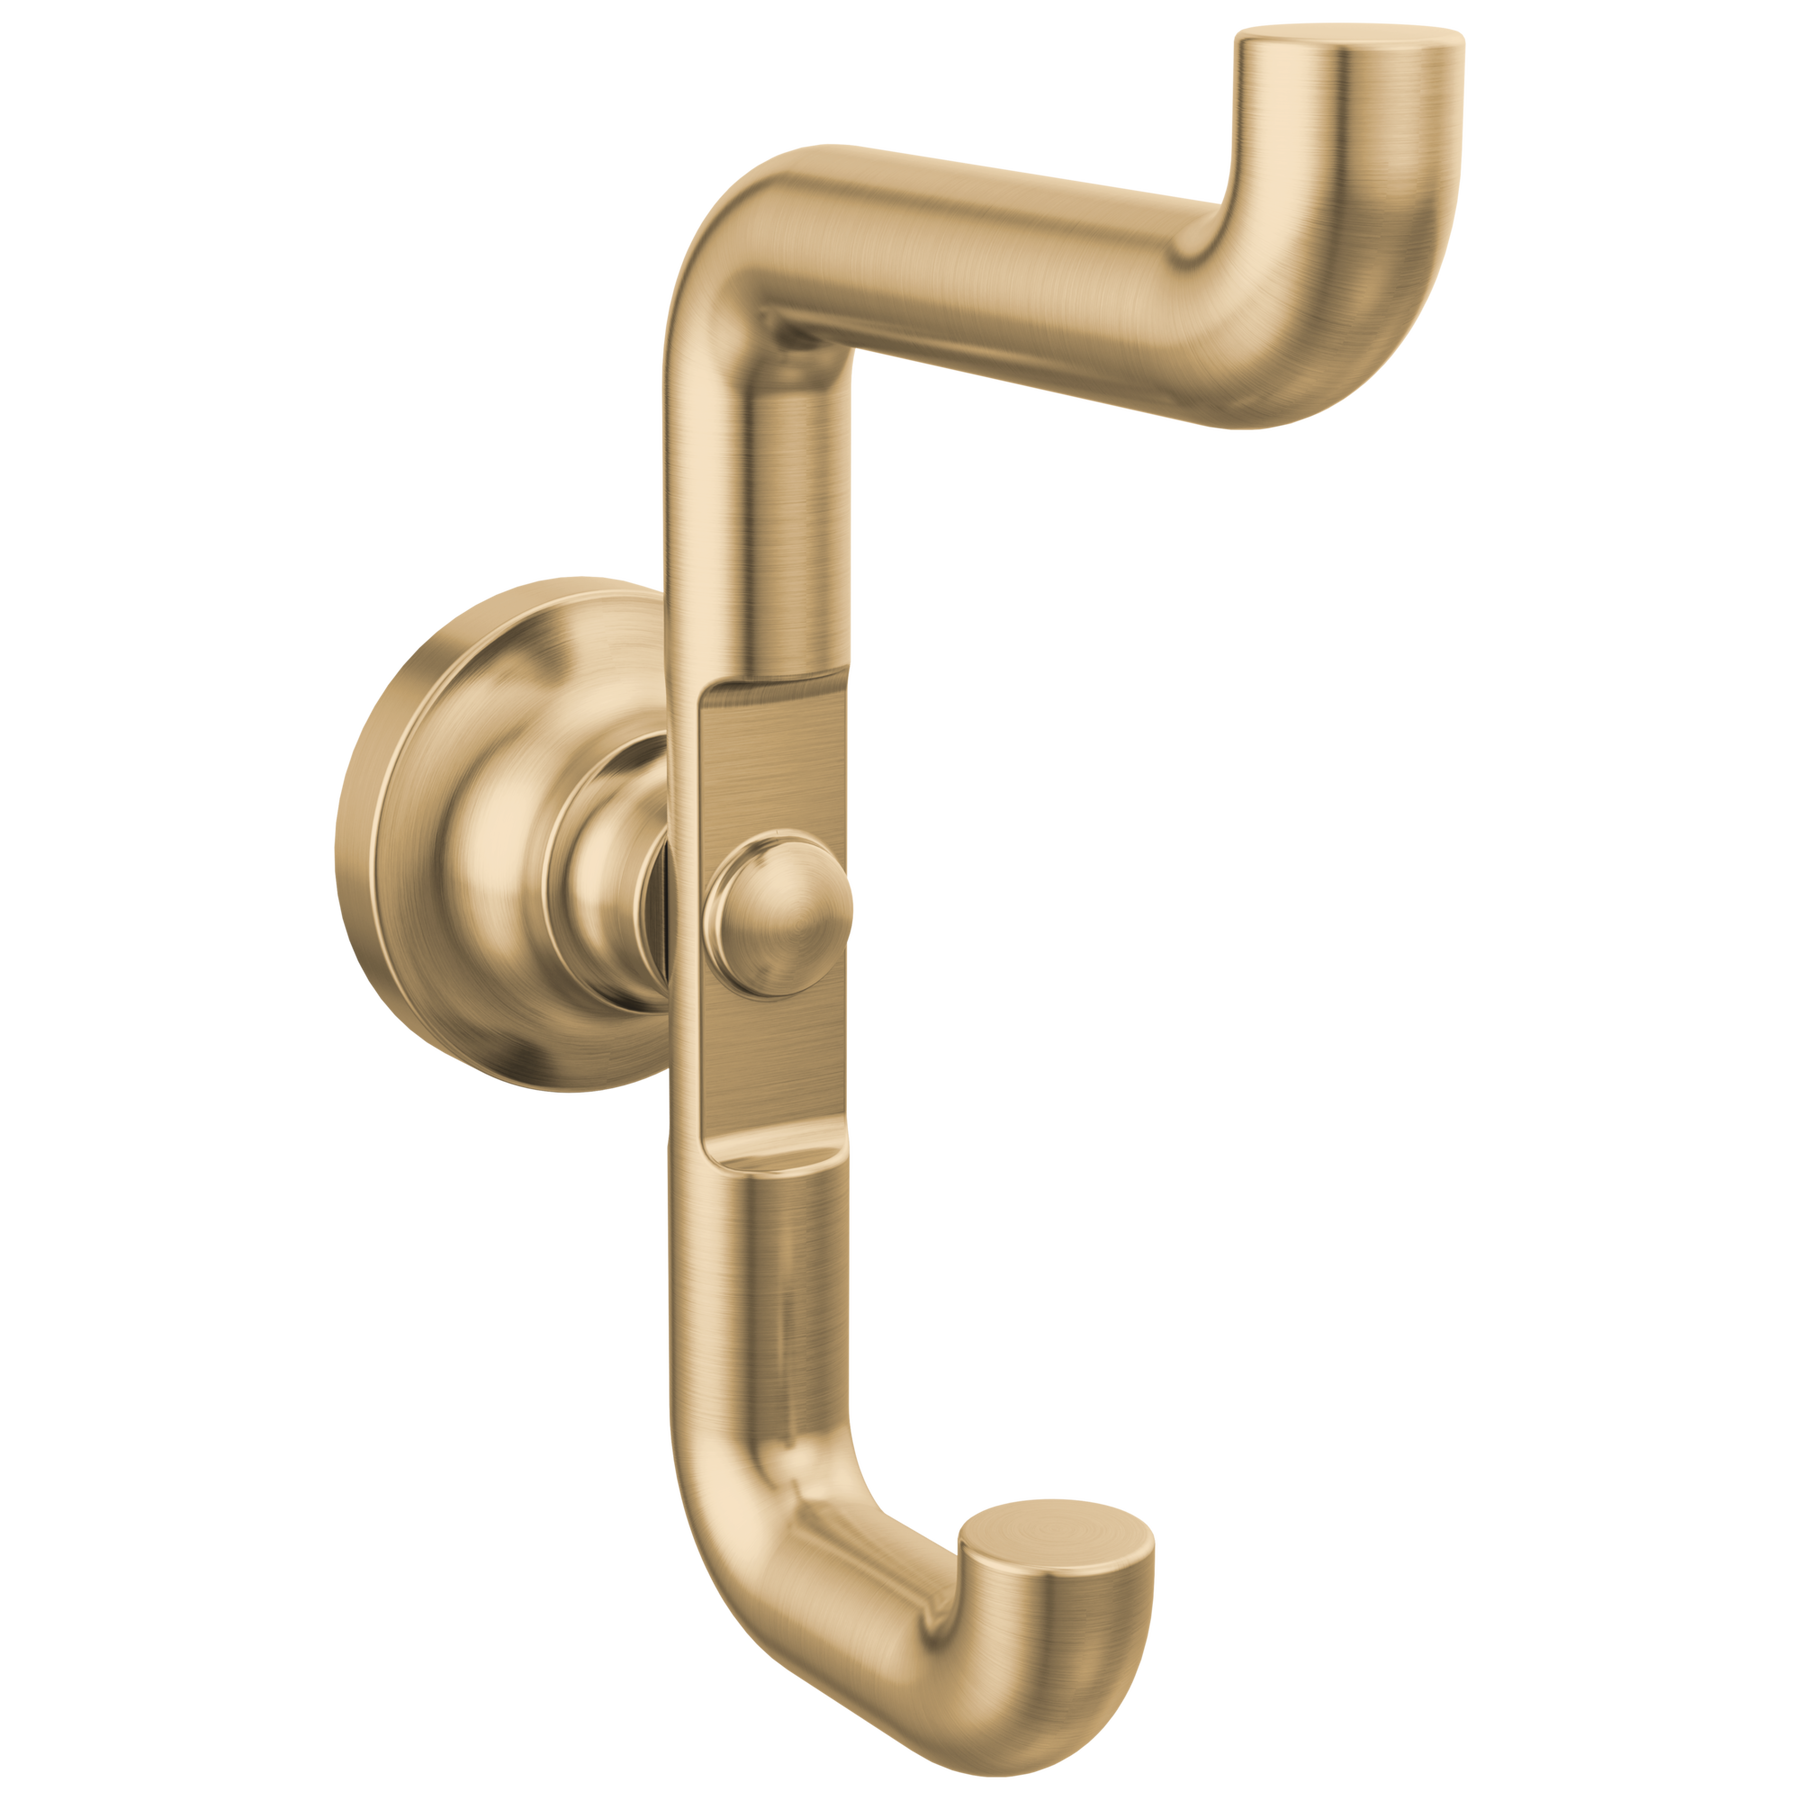 Double Robe Hook in Champagne Bronze 73535-CZ